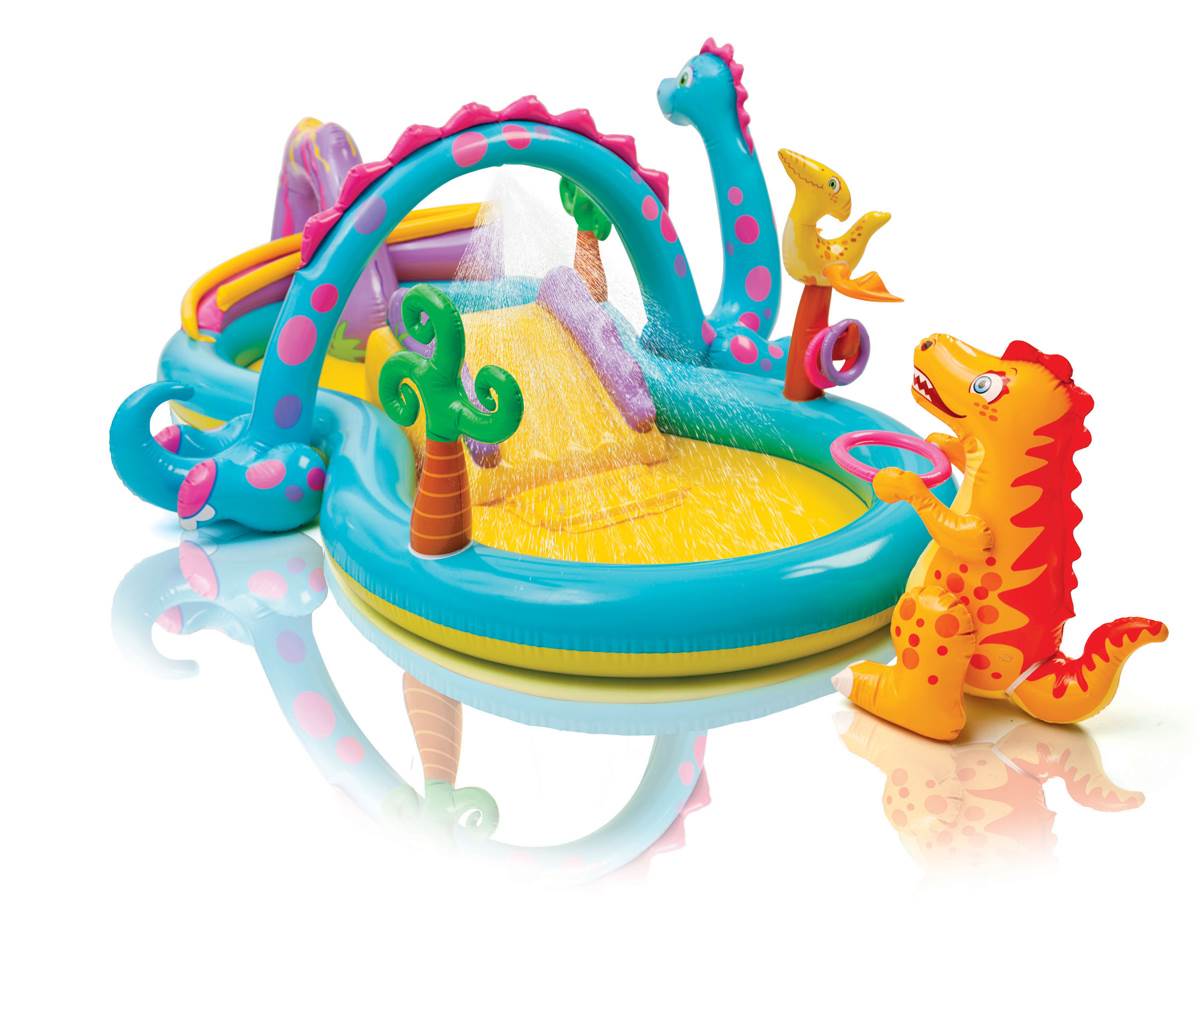 Intex-11ft-x-7.5ft-x-44in-Dinoland-Play-Center-Kiddie-Inflatable-Swimming-Pool-Swimming-Pools